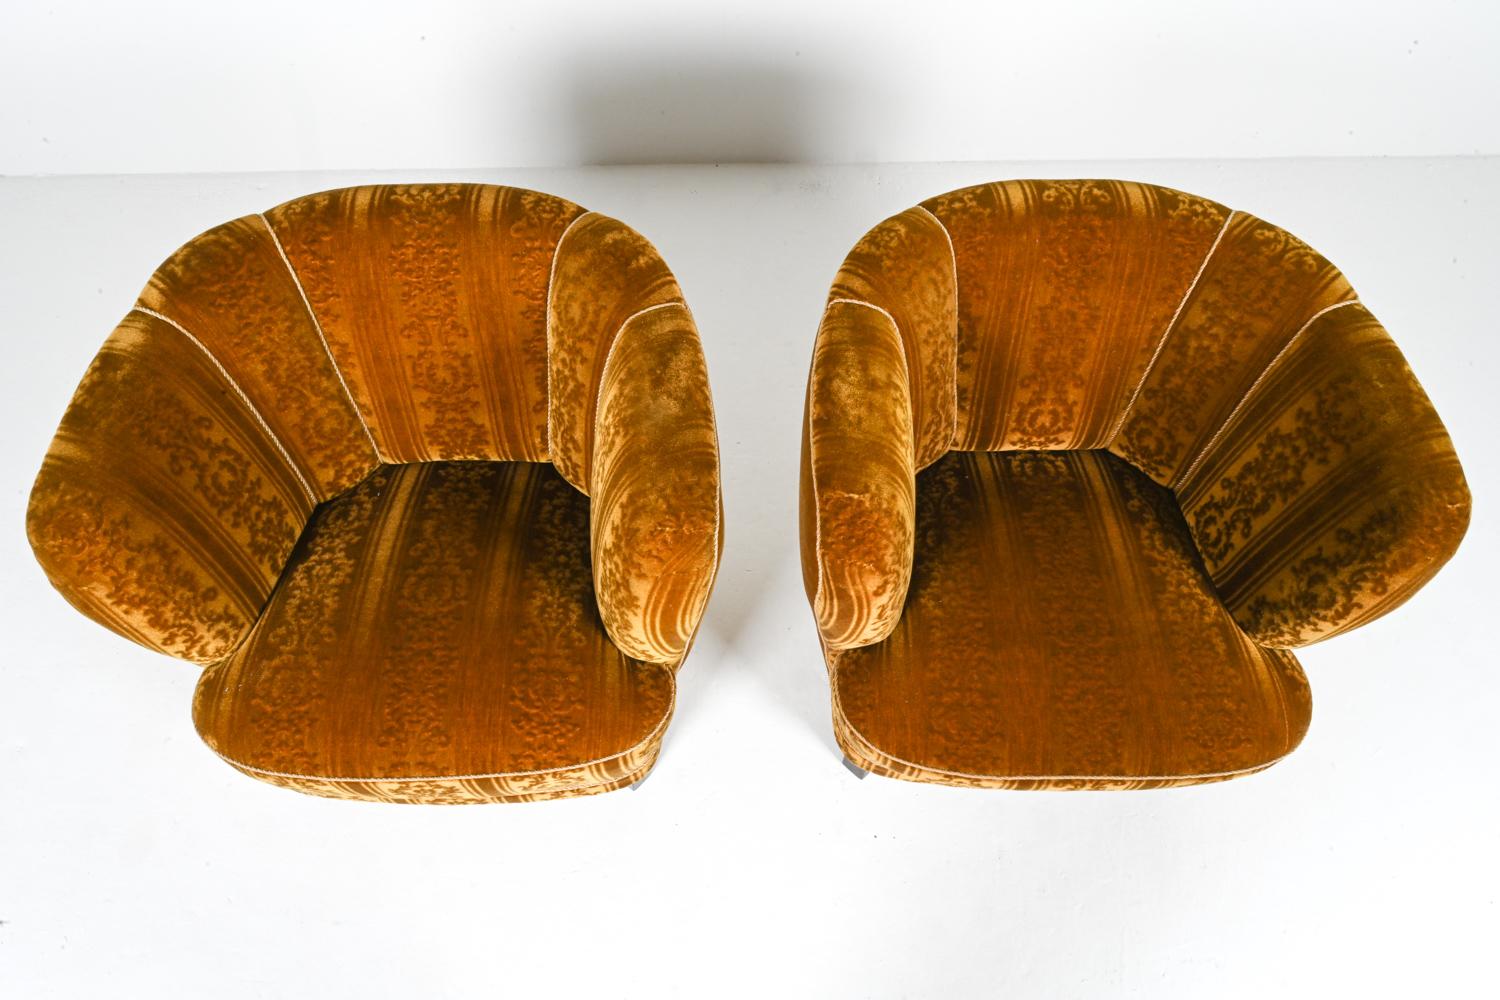 Scandinavian Modern Pair of Manner of Viggo Boesen Lounge Chairs by Slagelse, c. 1940's For Sale